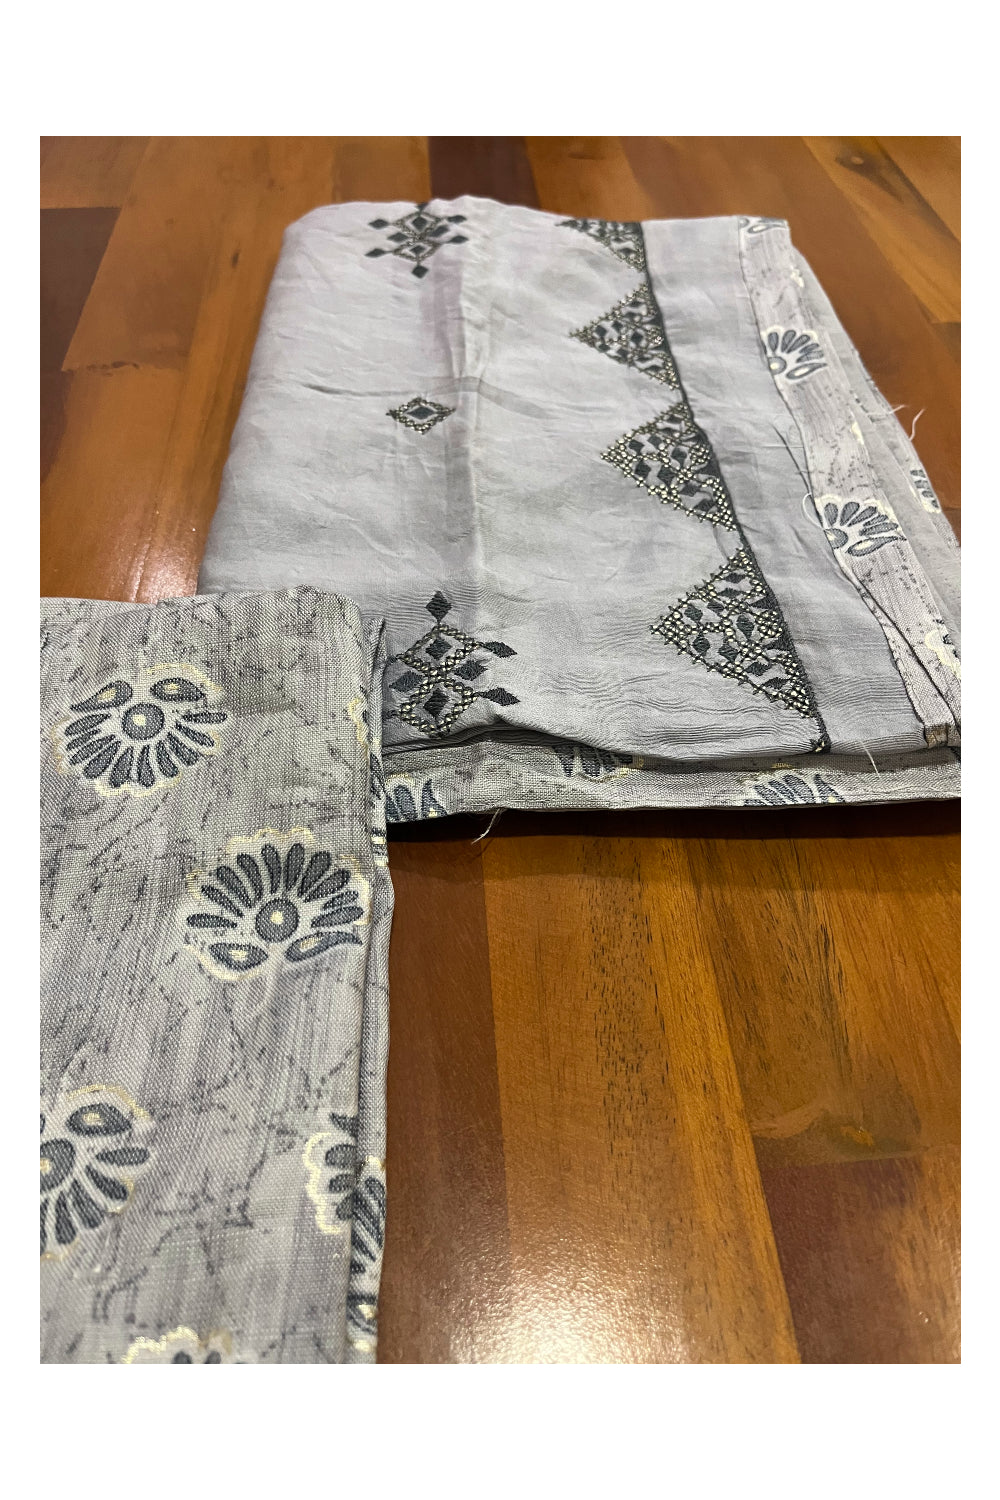 Southloom™ Cotton Churidar Salwar Suit Material in Grey with Printed Works